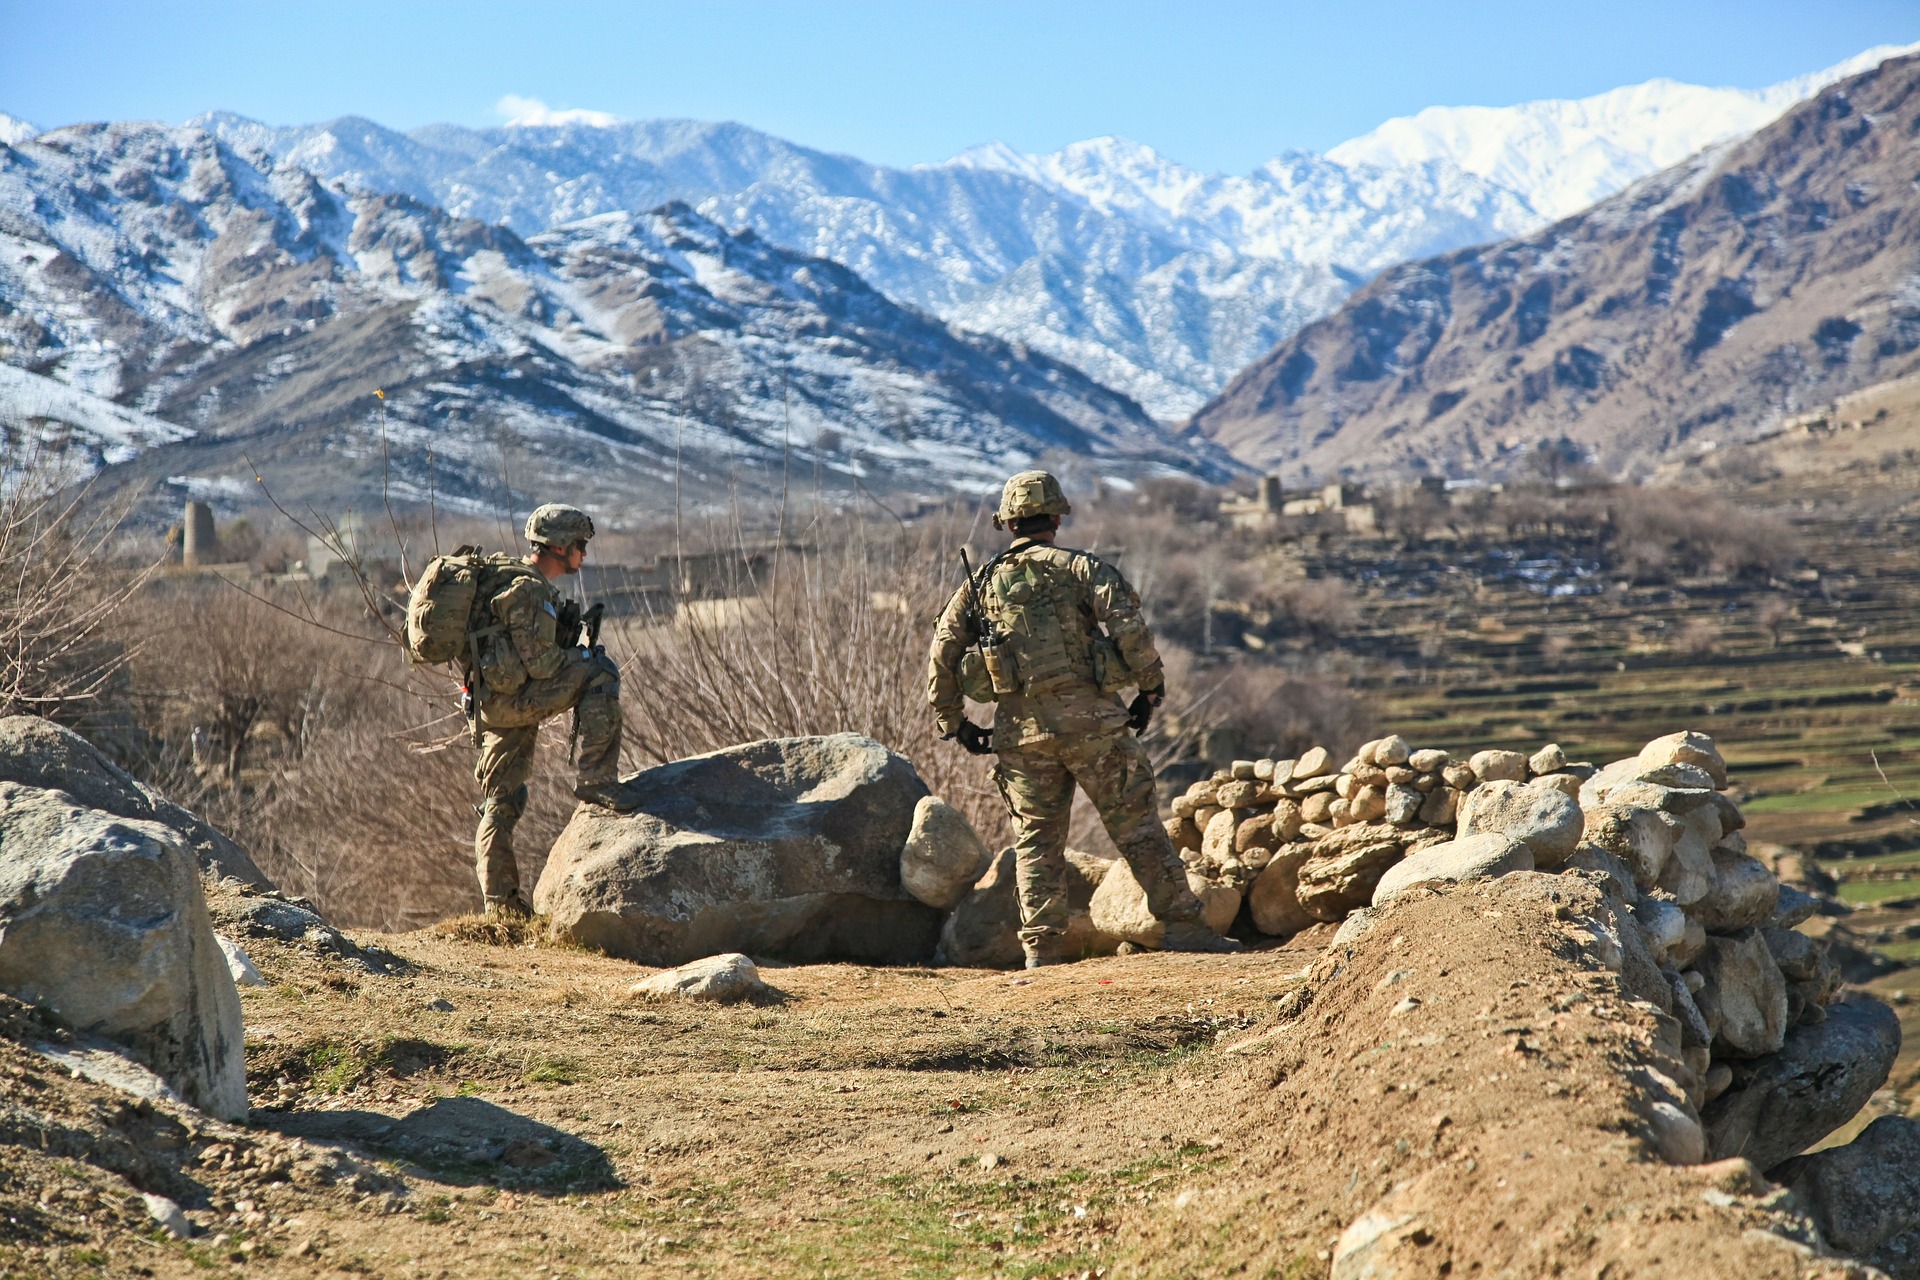 Two soldiers stand on a rocky mountain scape